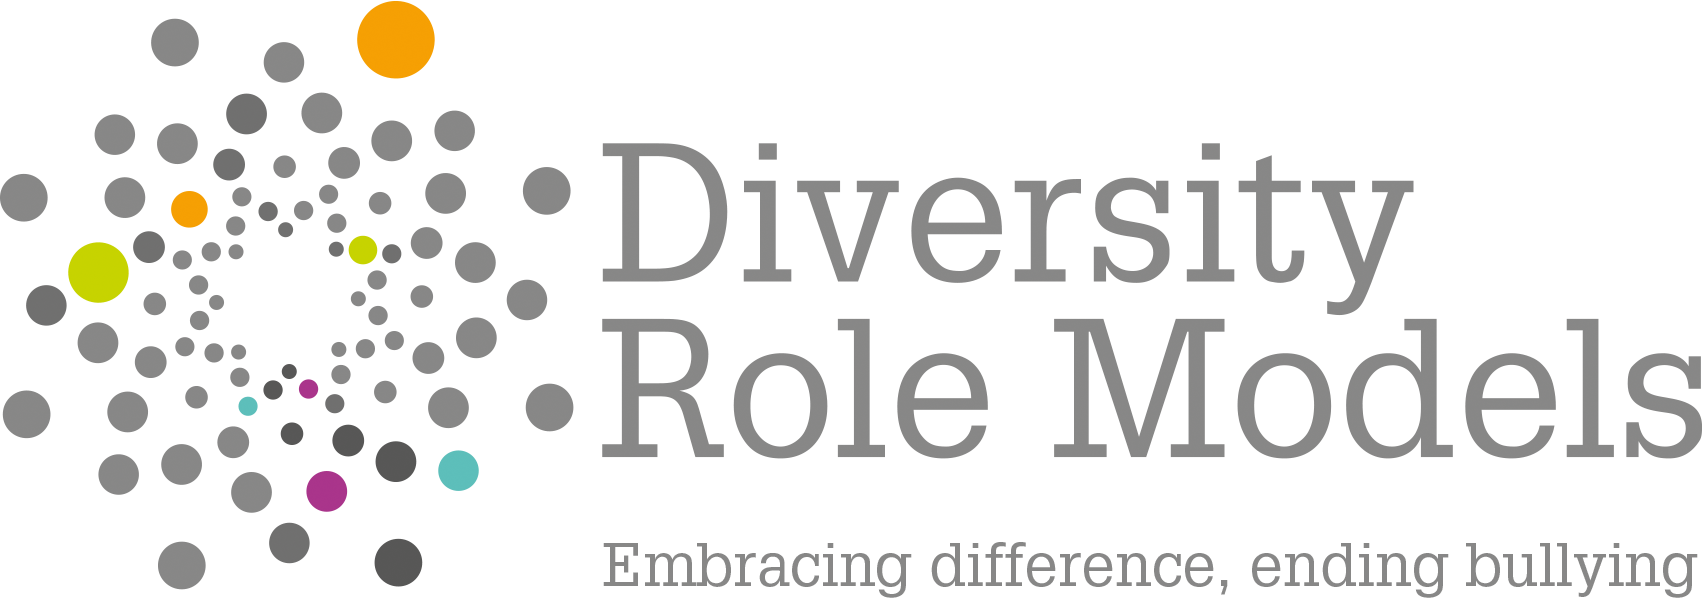 charity Diversirty role model logo